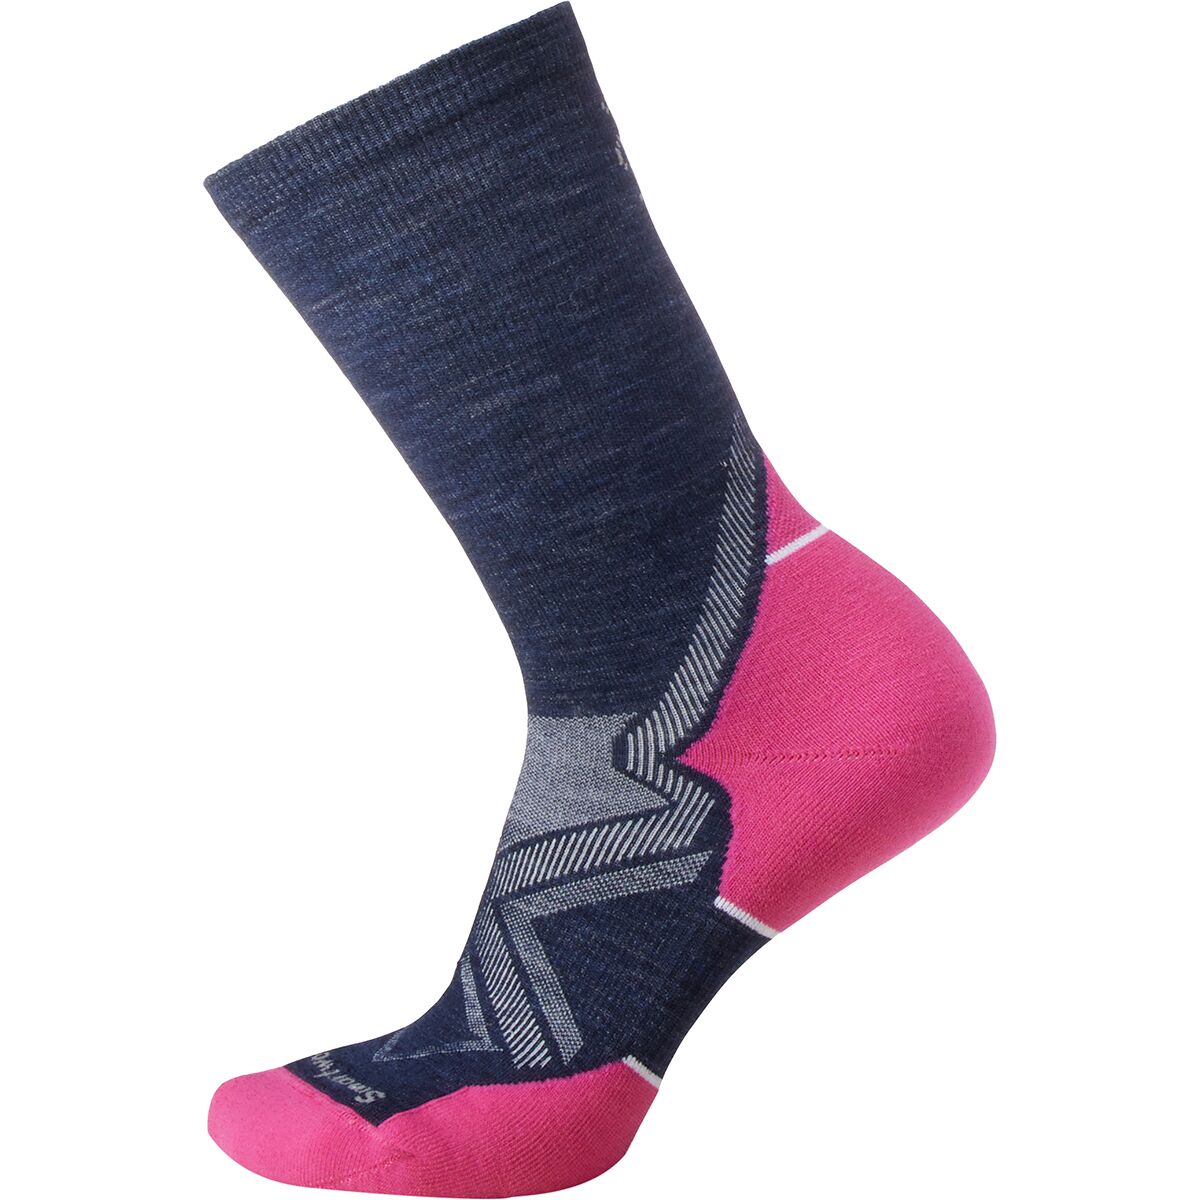 Smartwool Run Cold Weather Targeted Cushion Crew Sock - Women's